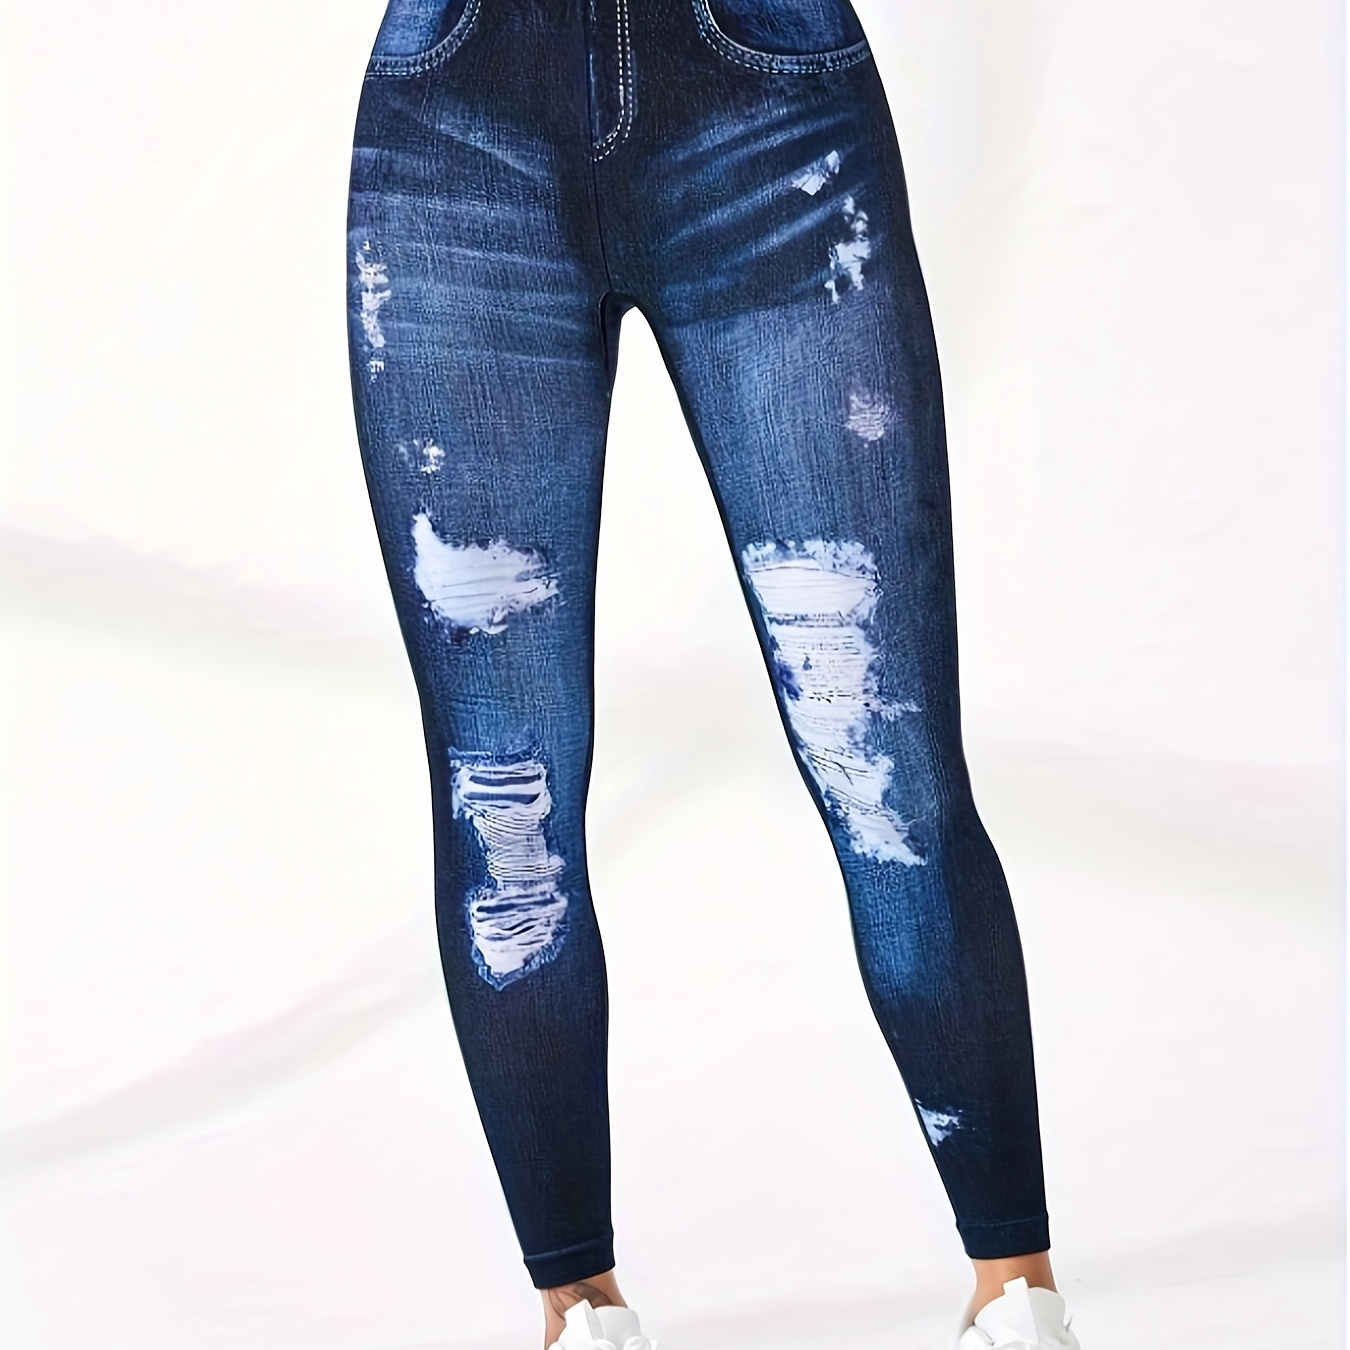 

Faux Denim Print High Waist Leggings, Casual Skinny Stretchy Leggings For Every Day, Women's Clothing